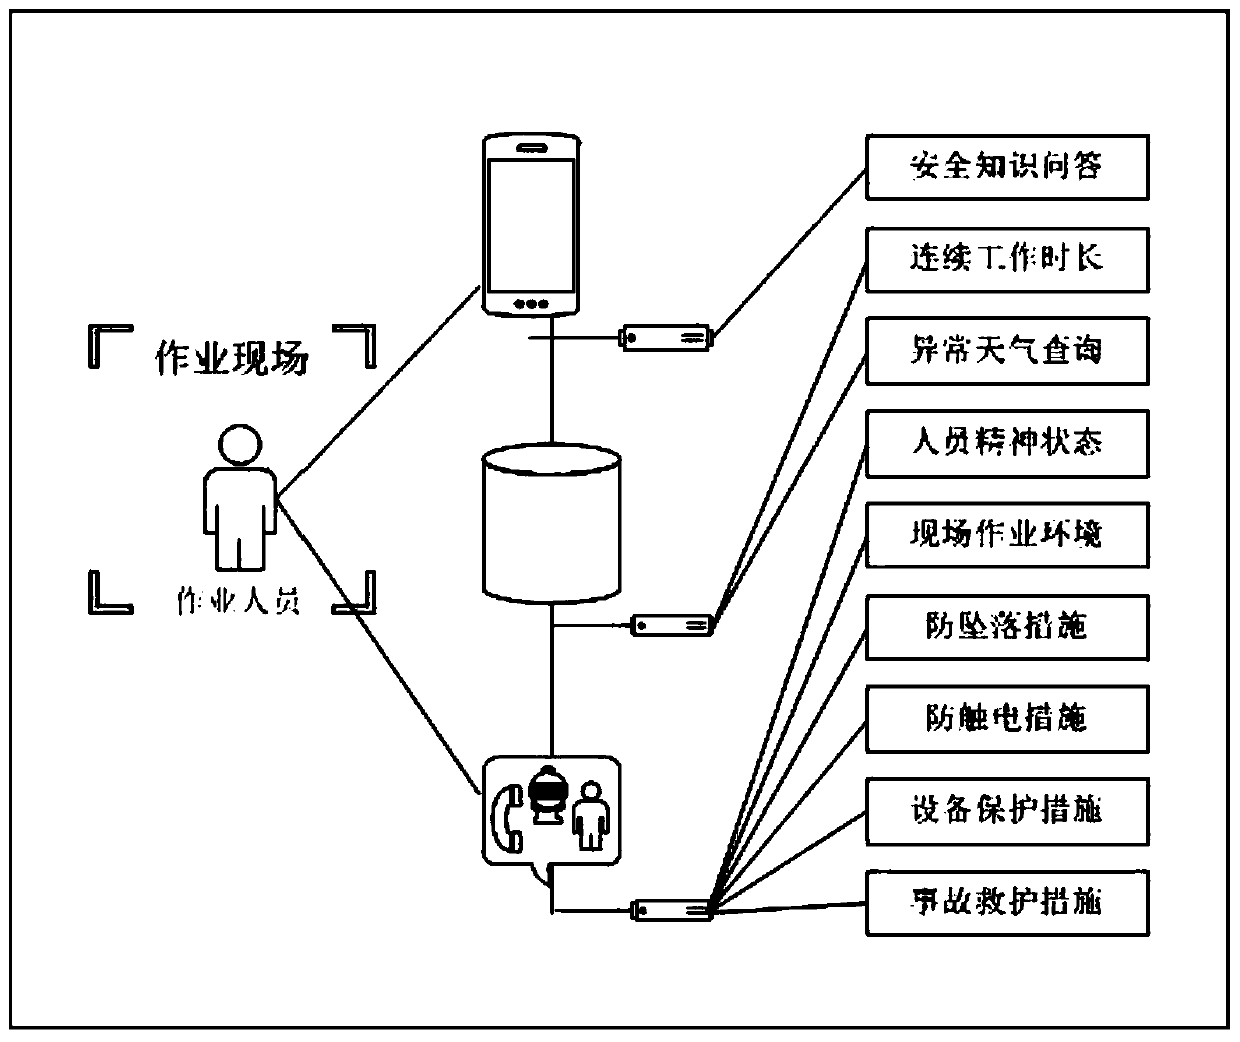 Safety control method and system for fault processing operation site of power utilization acquisition equipment